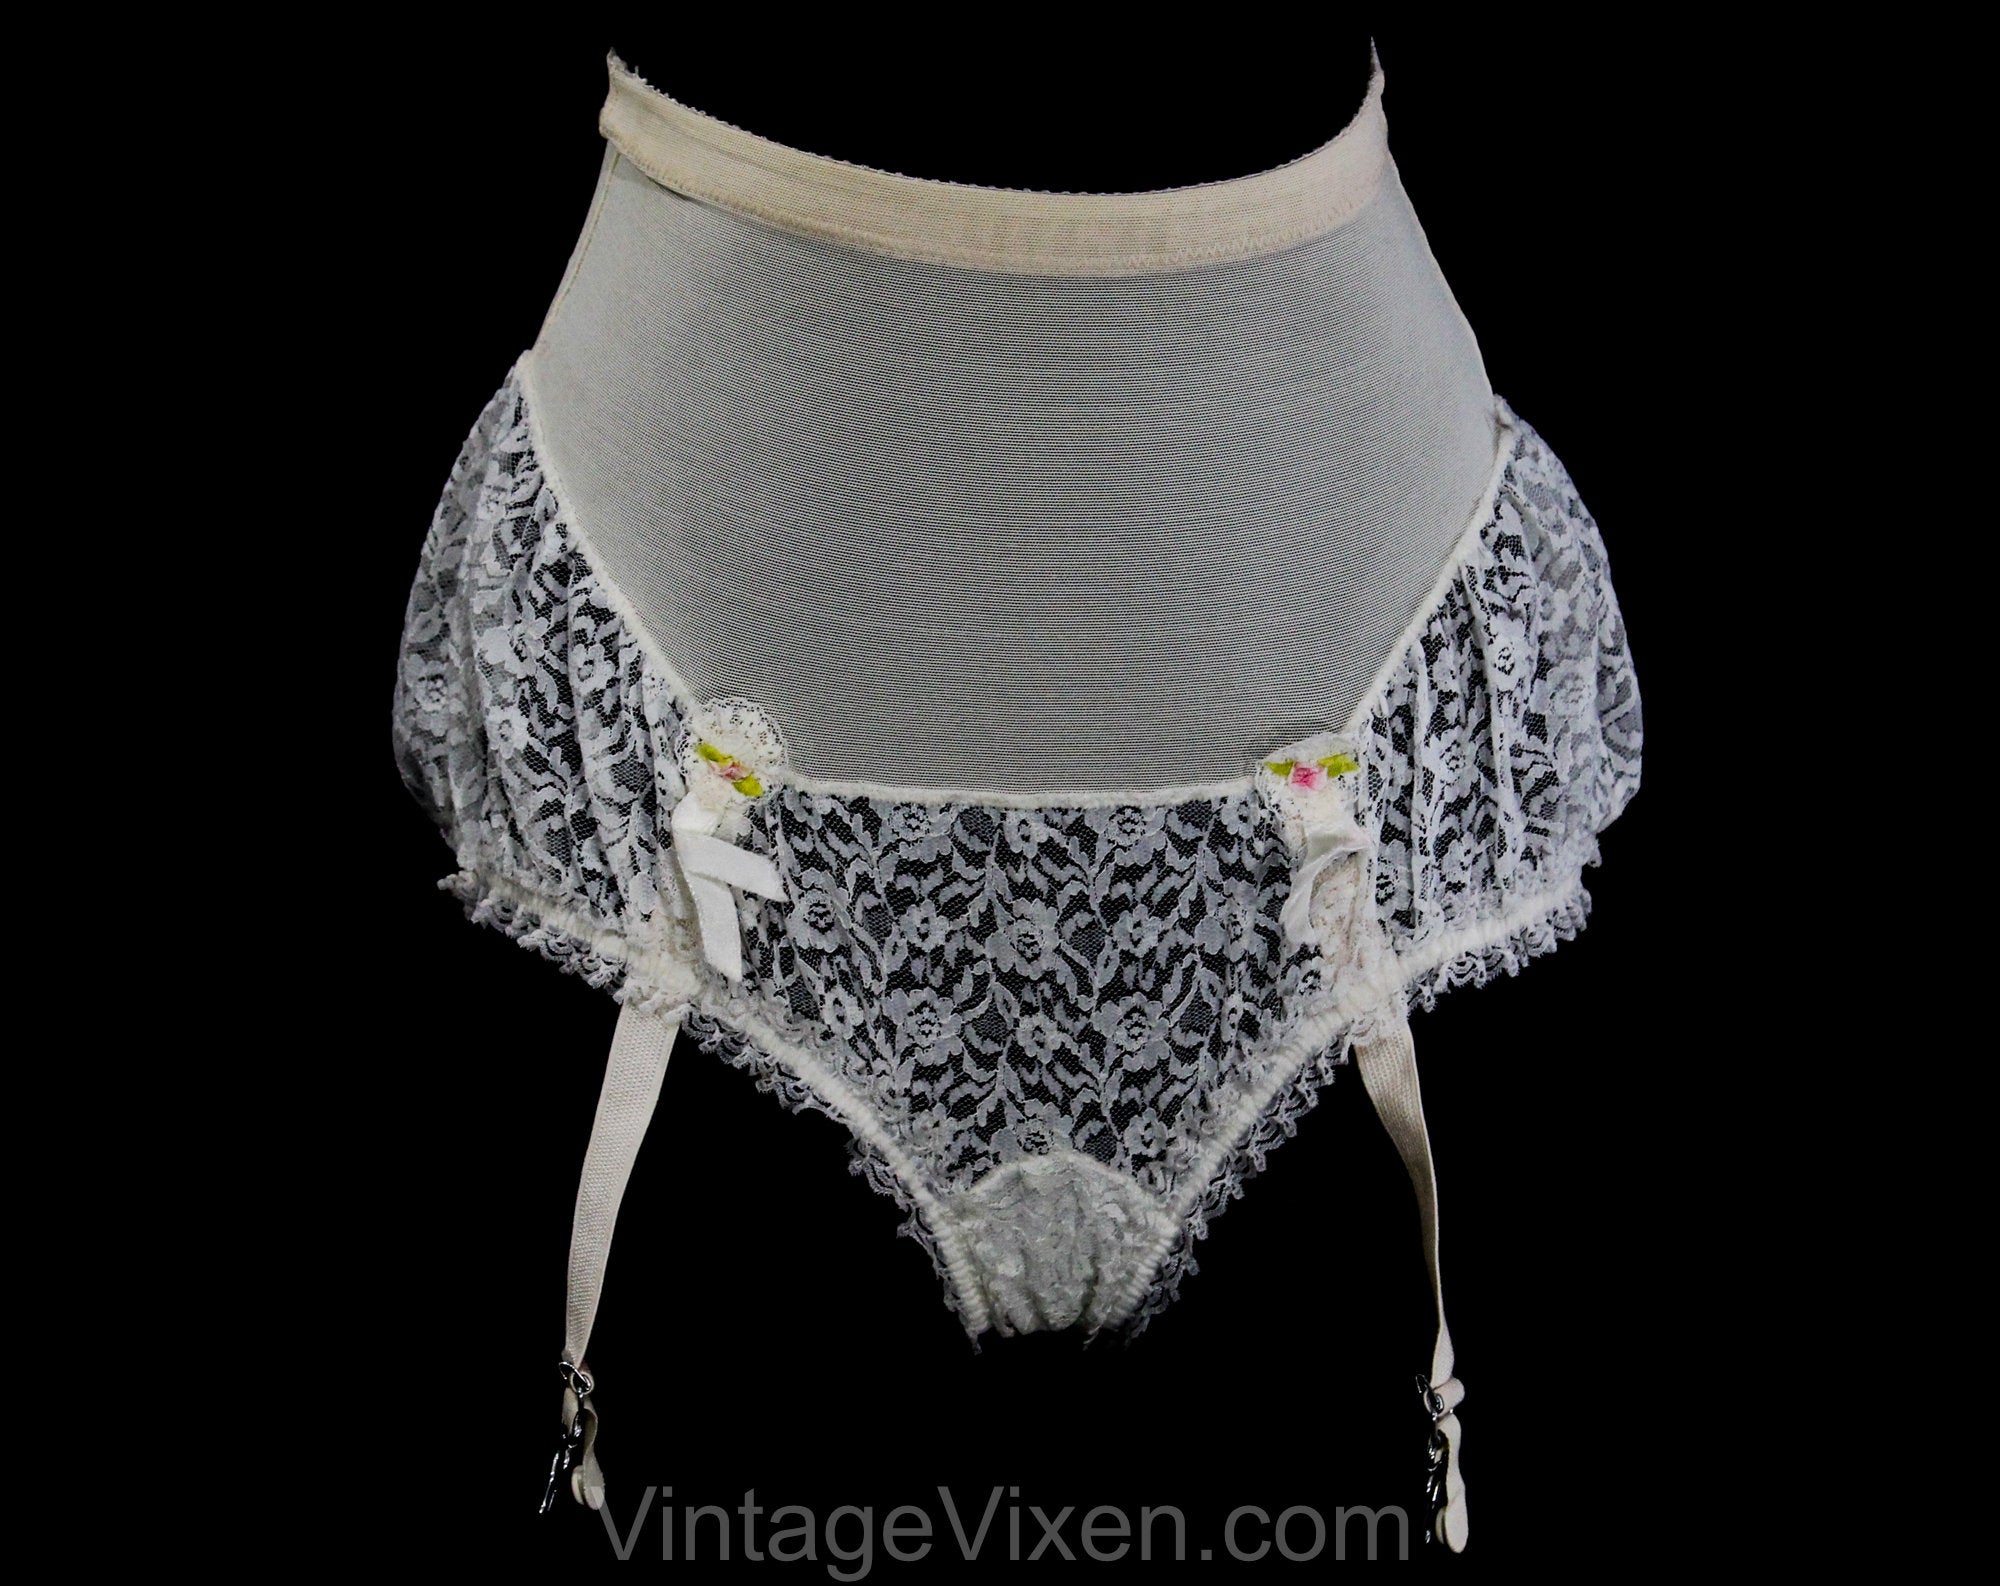 Buy 1950s Panty Girdle Online In India -  India